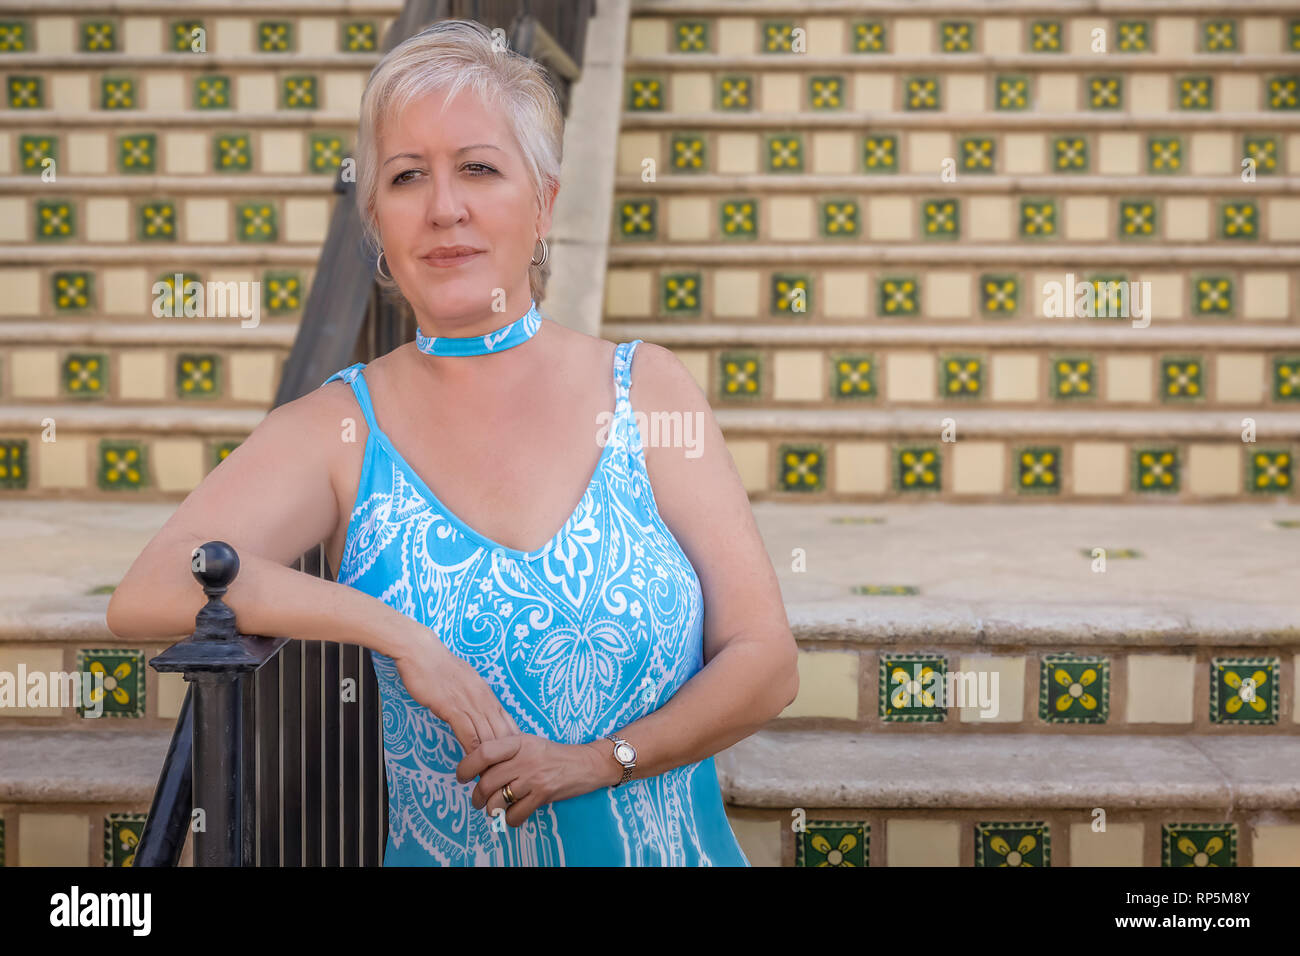 A mature modern blond woman waits at the bottom of the steps leaning on the rail. Stock Photo